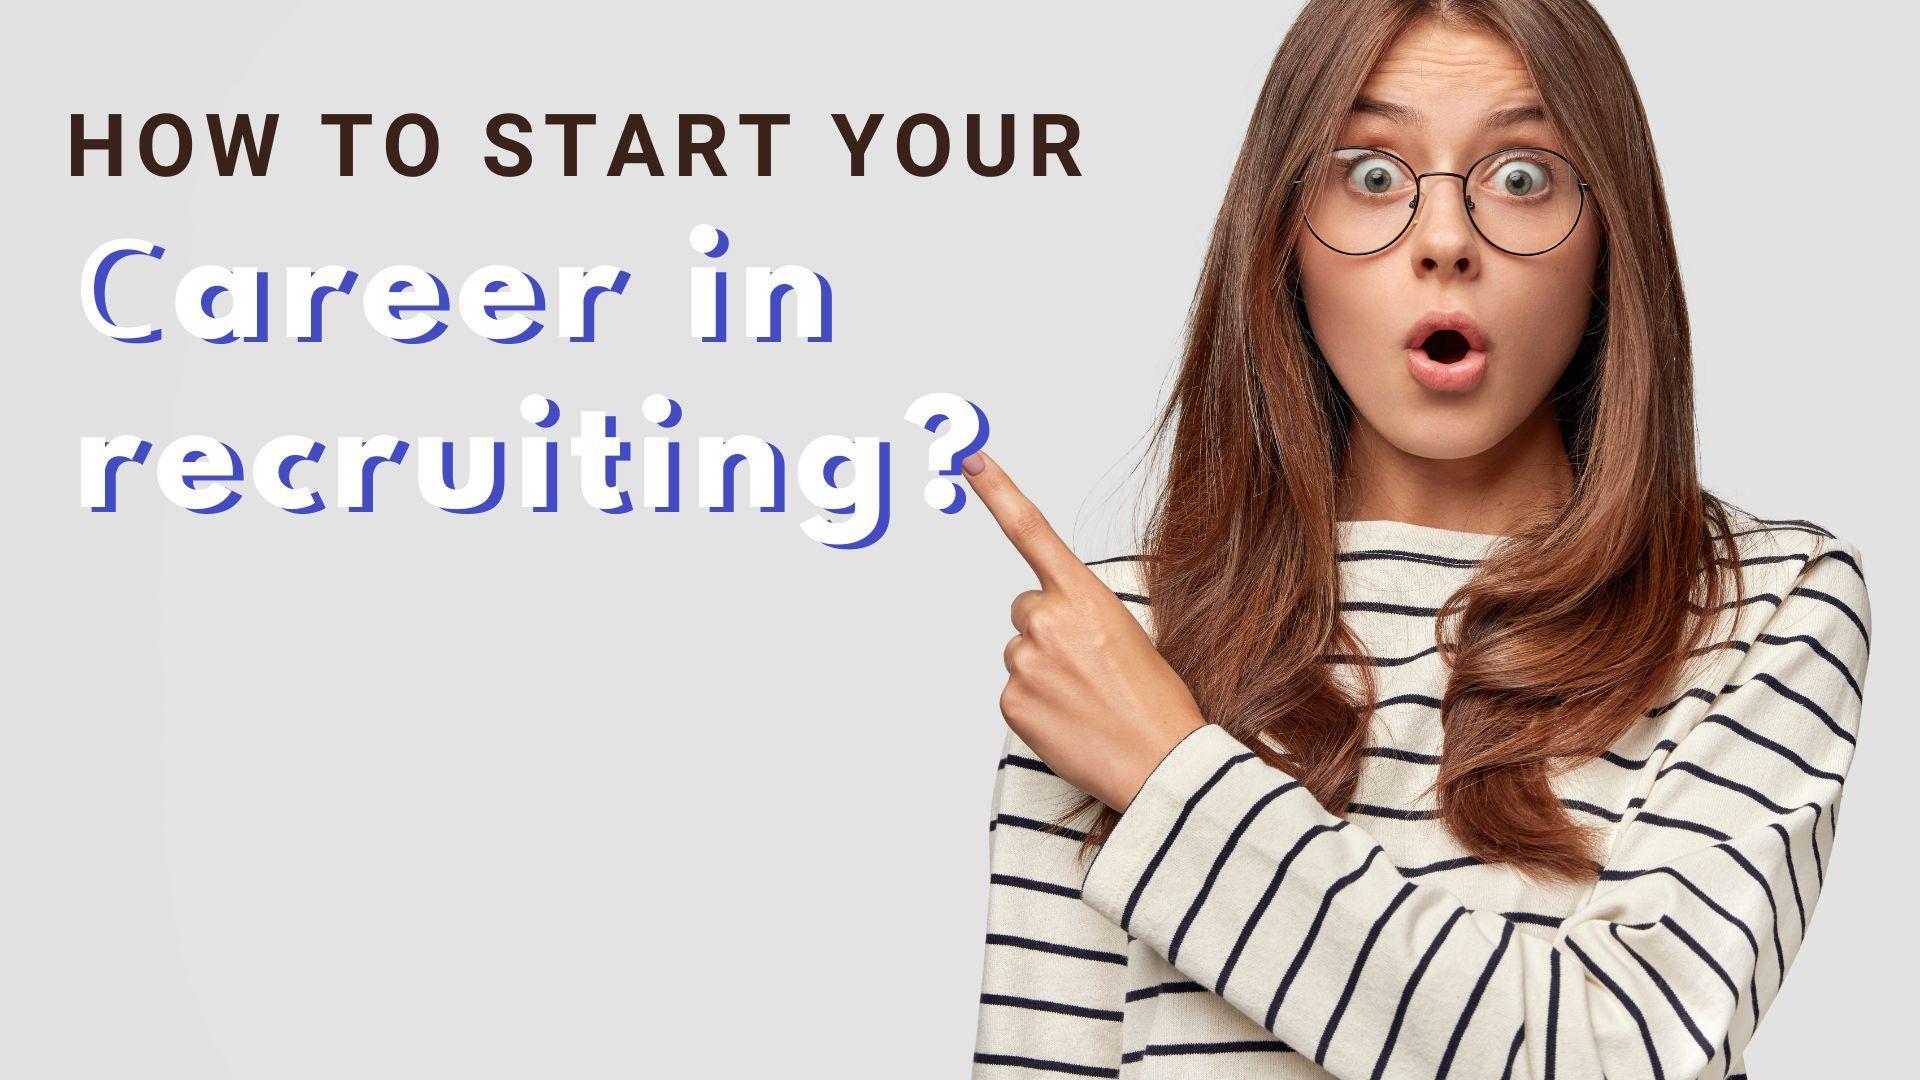 How to start your career in recruiting?